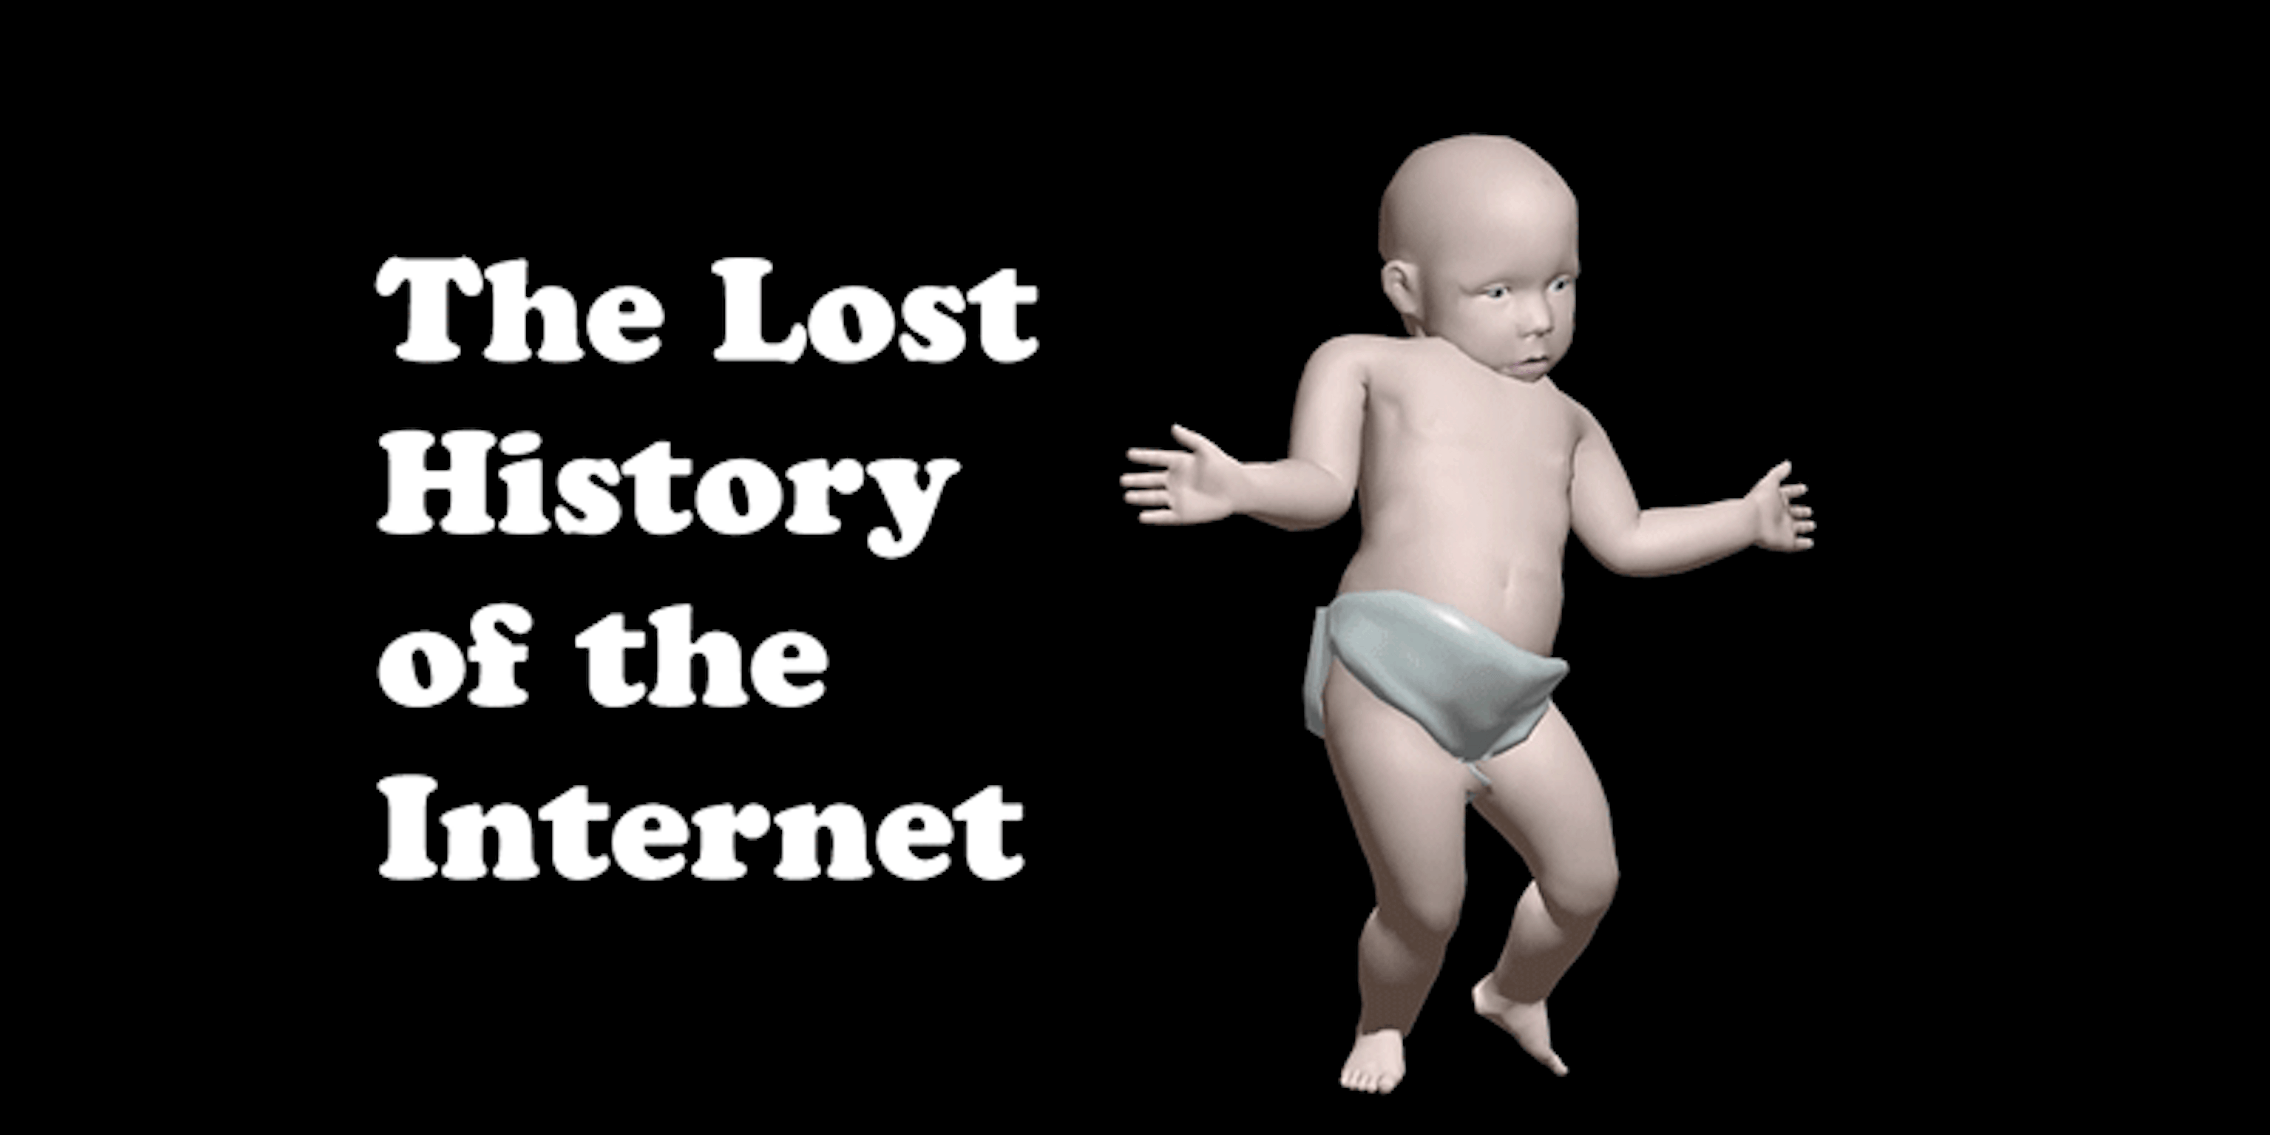 Dancing baby with 'The Lost History of the Internet' caption